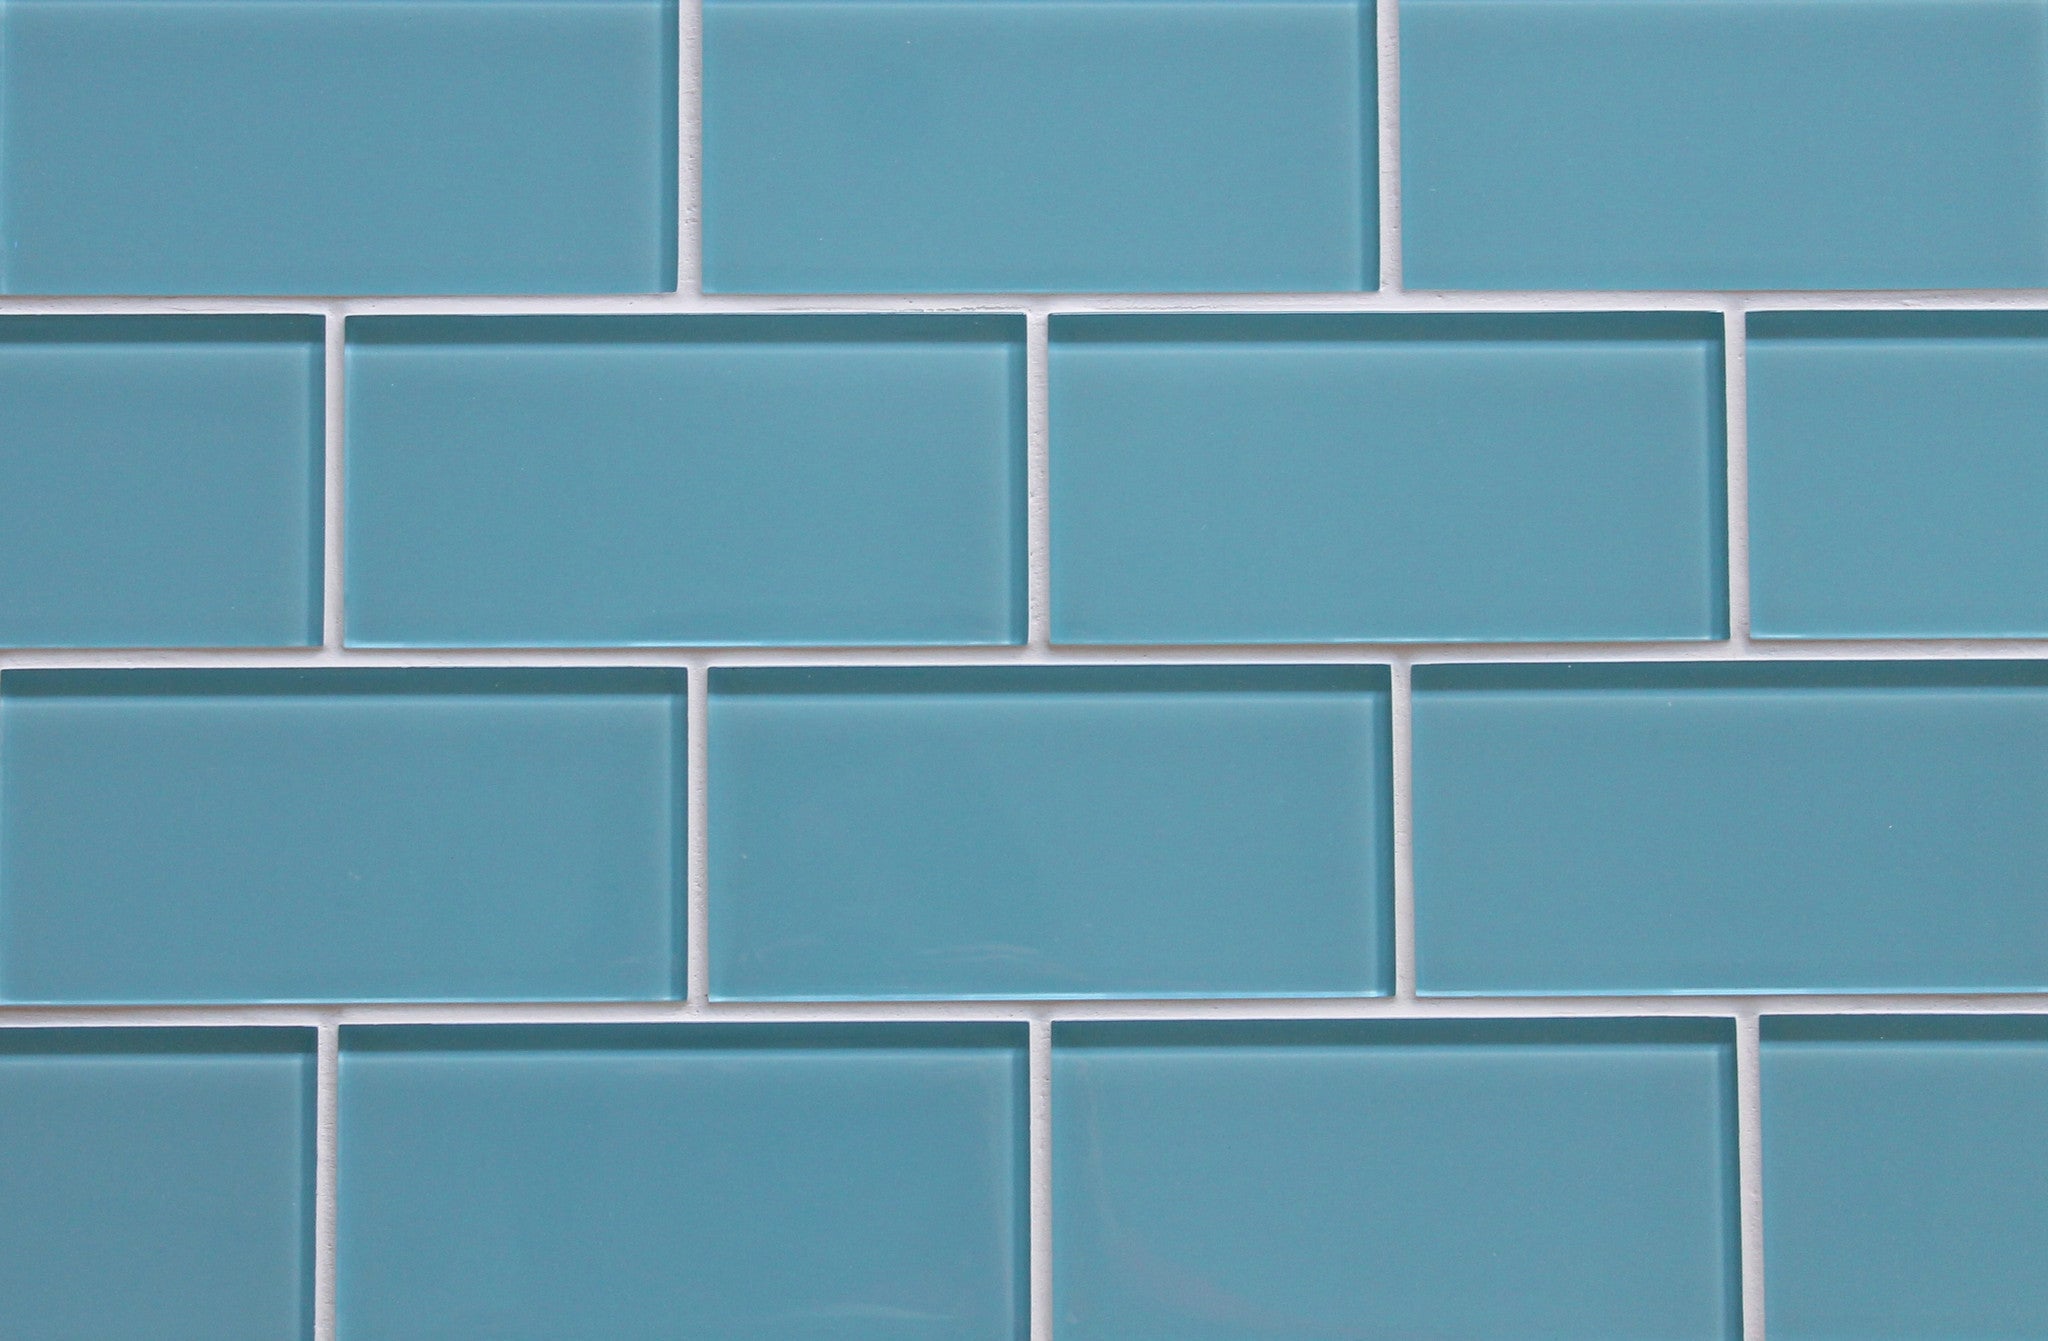 Infinity Blue 3x6 Glass Subway Tiles Rocky Point Tile Glass And Mosaic Tile Store